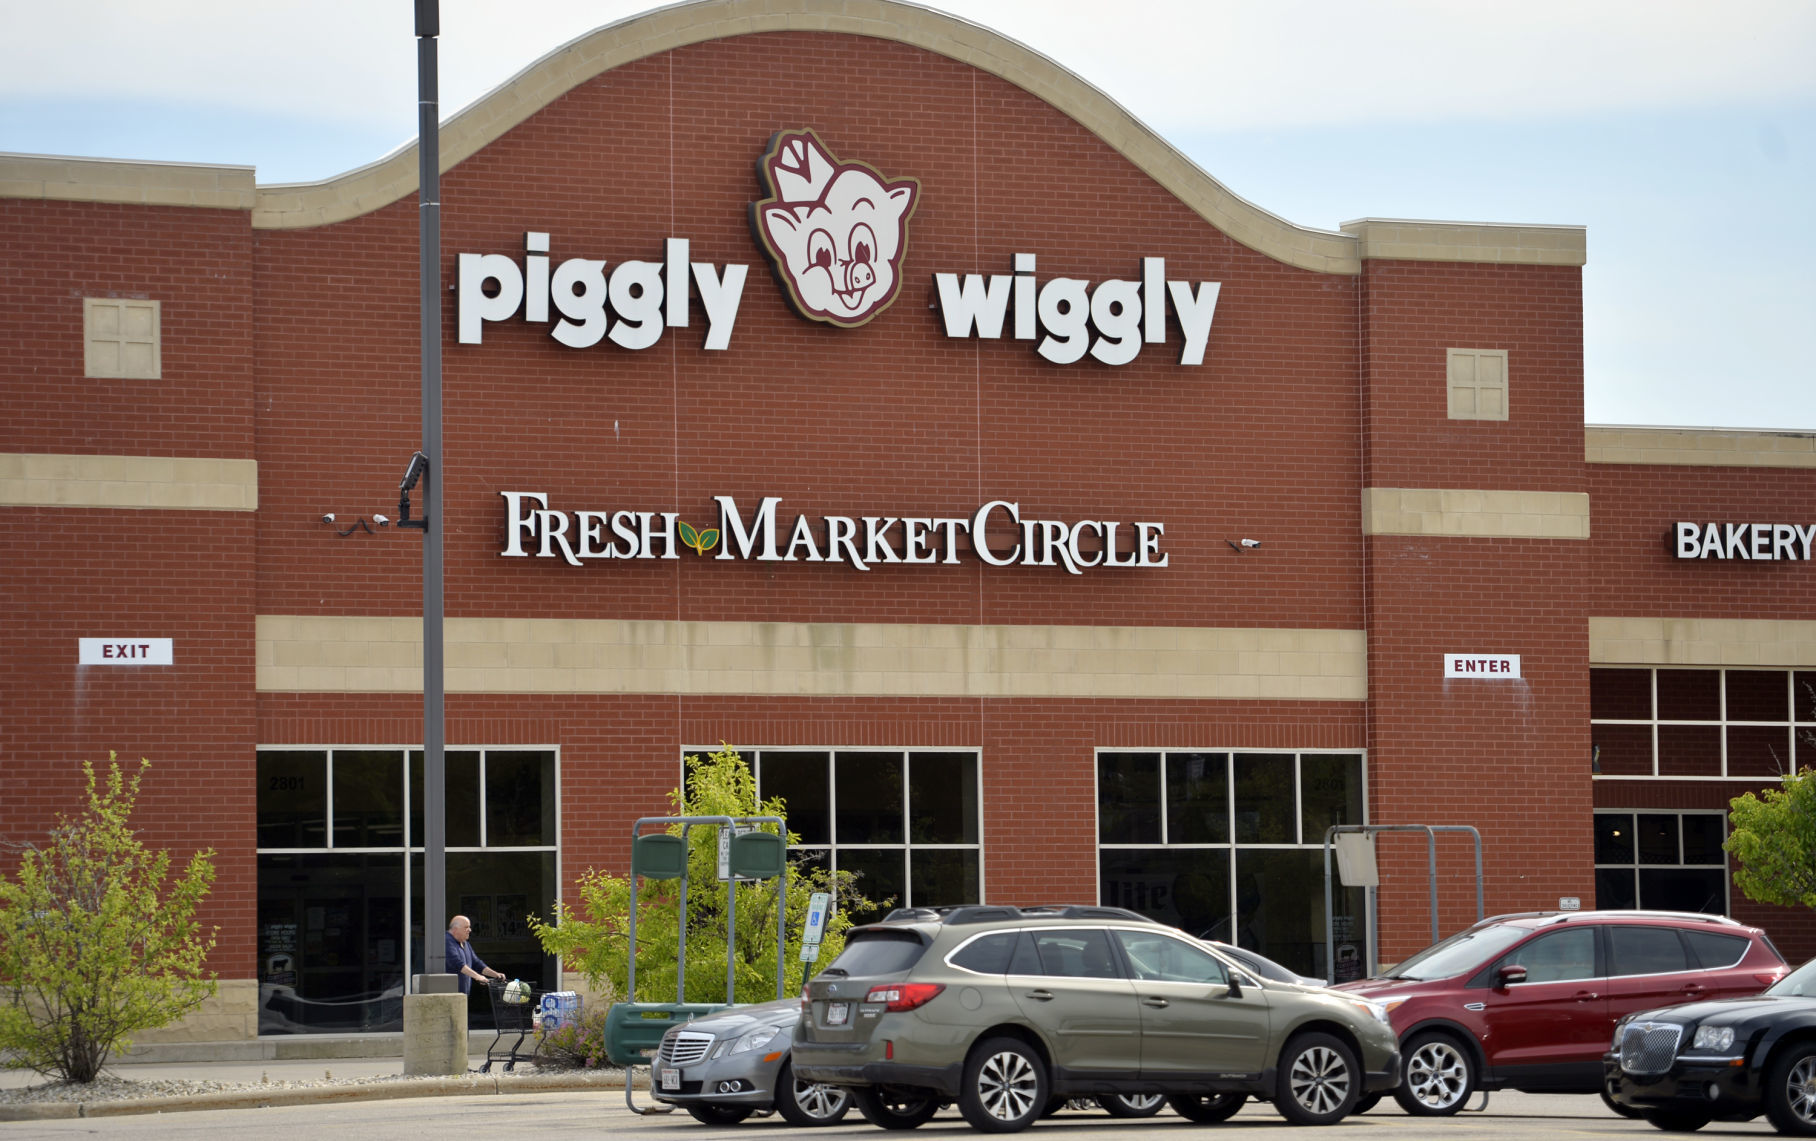 who owns piggly wiggly